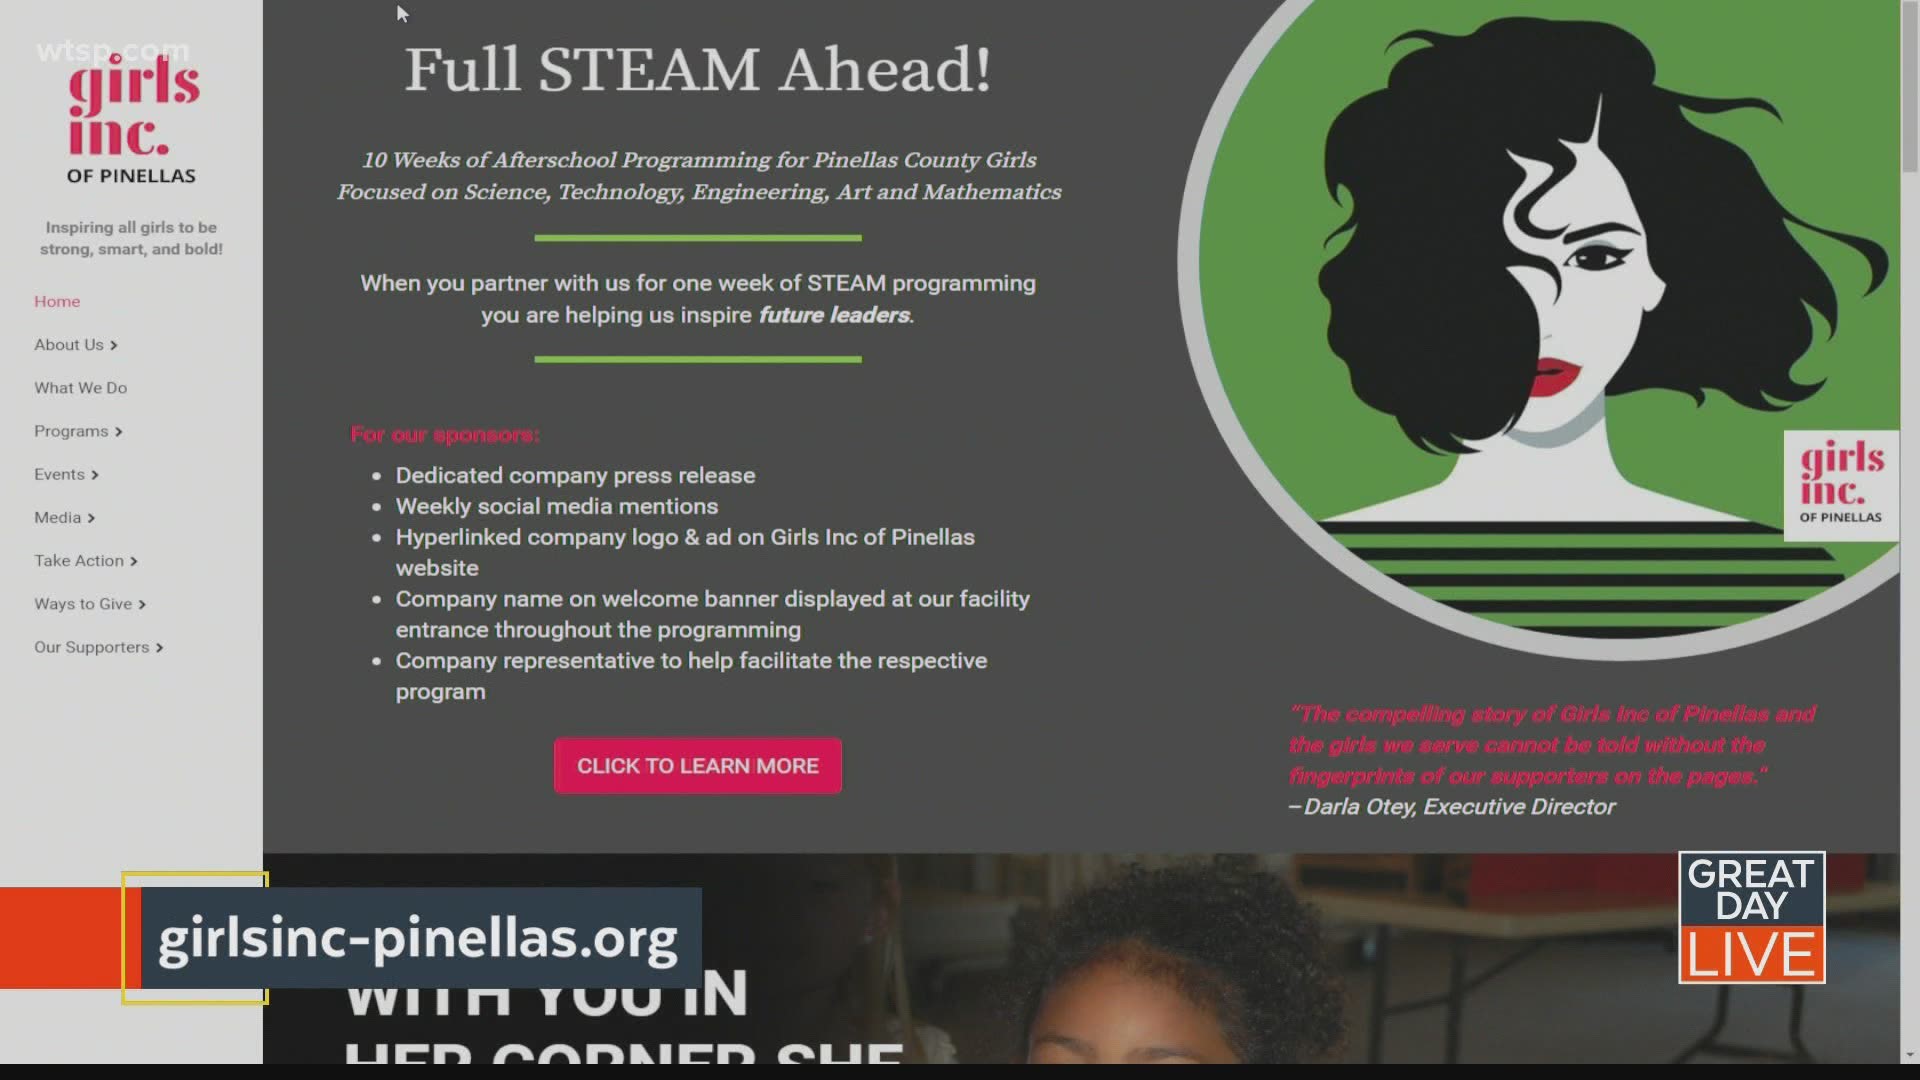 Full “STEAM” ahead with Girls Inc.